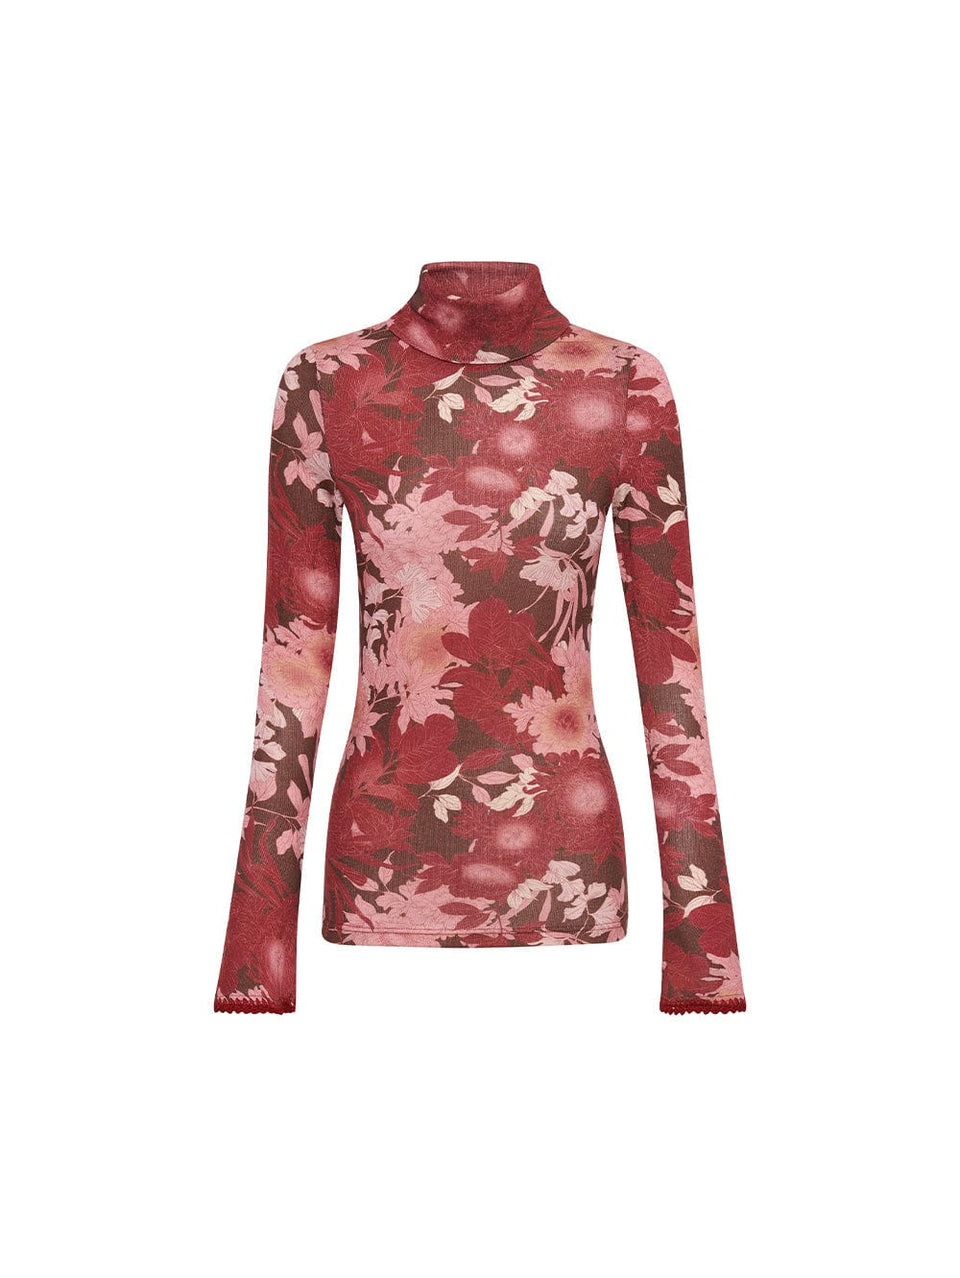 Ghost image of KIVARI Hacienda Skivvy: A red, pink and brown floral fitted turtleneck crafted from sustainable Lyocell and wool blend, featuring a flared sleeve with crochet cuff.